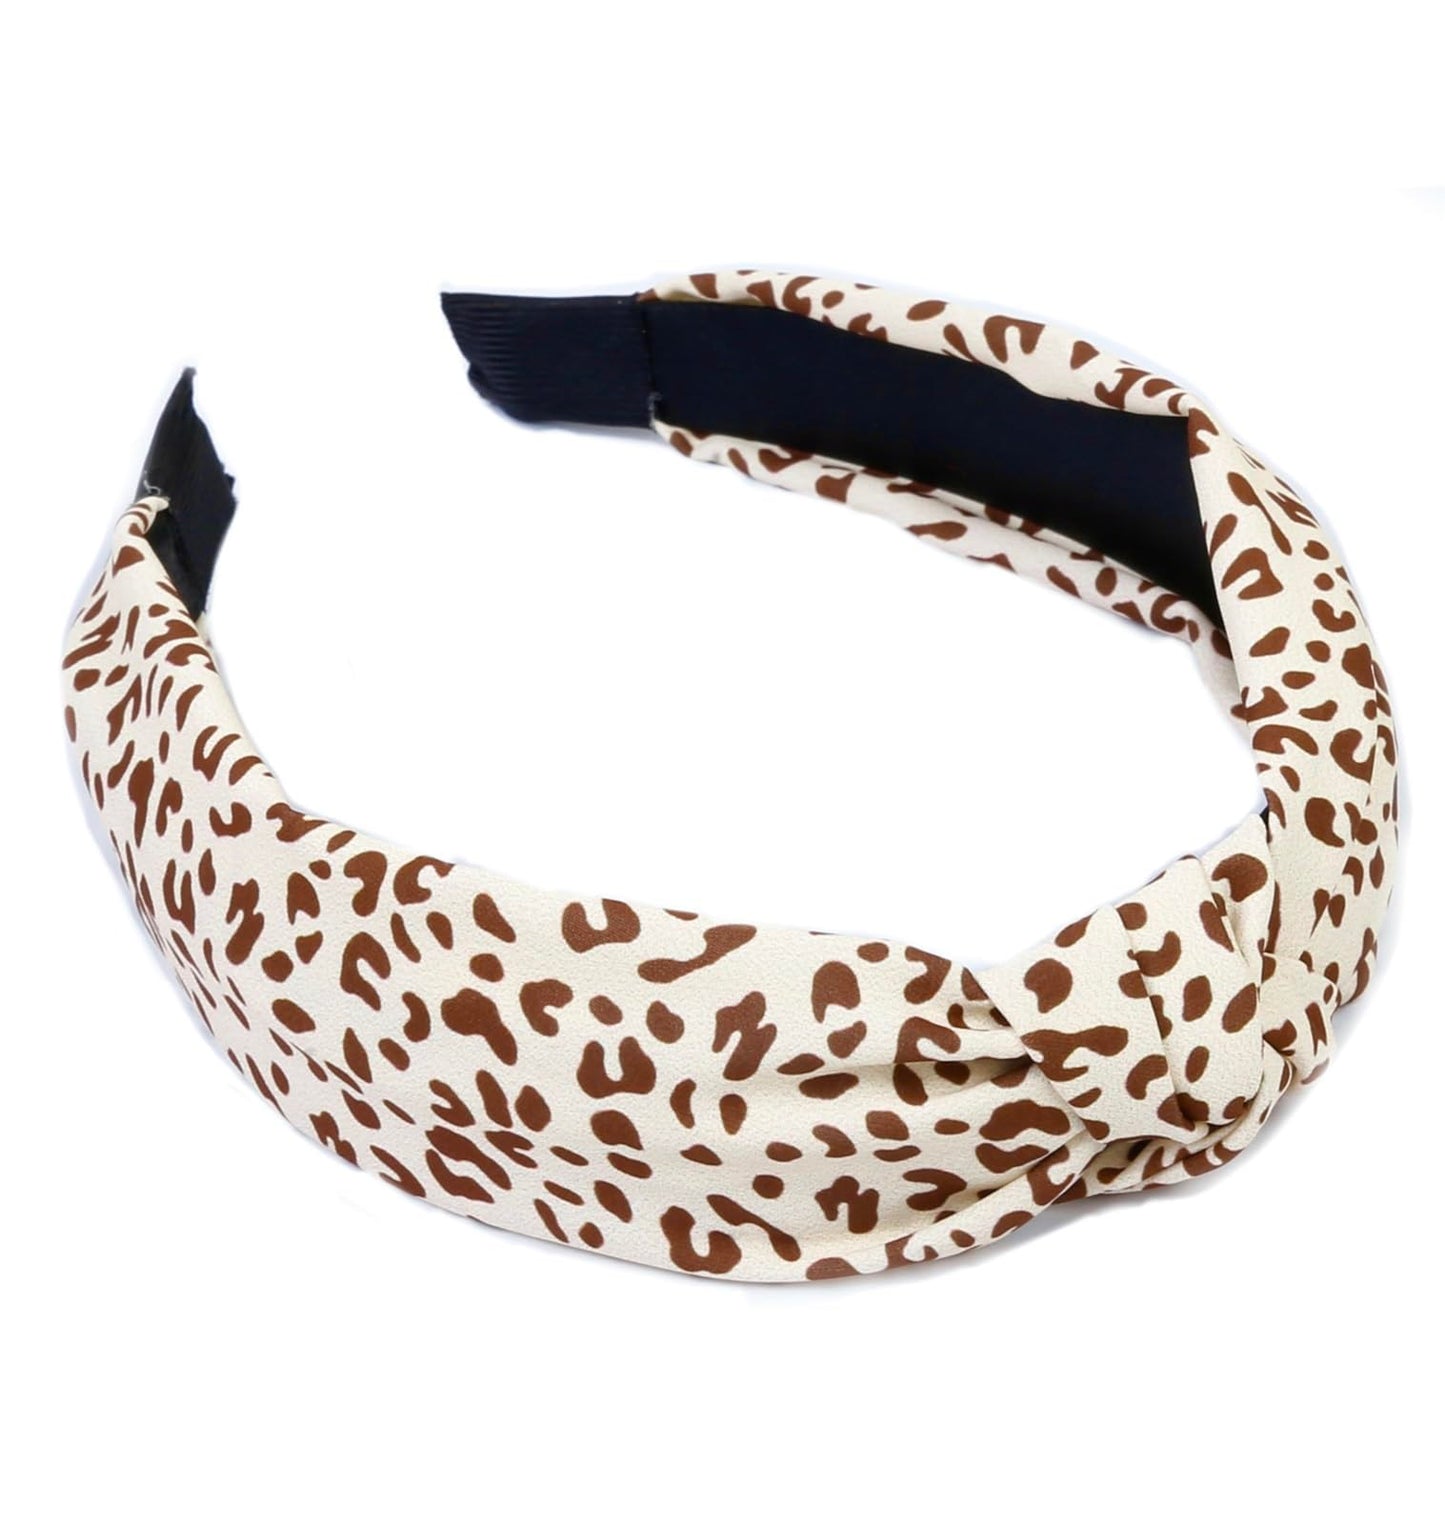 Knotted Headbands for Women Non Slip Fashion Women Headbands for Hair Cute Hairband for Women‘s Hair Wide Top Knot Hair Hoops for Girls Beige Brown Leopard Head Band Hair Accessories for Women 4PCS